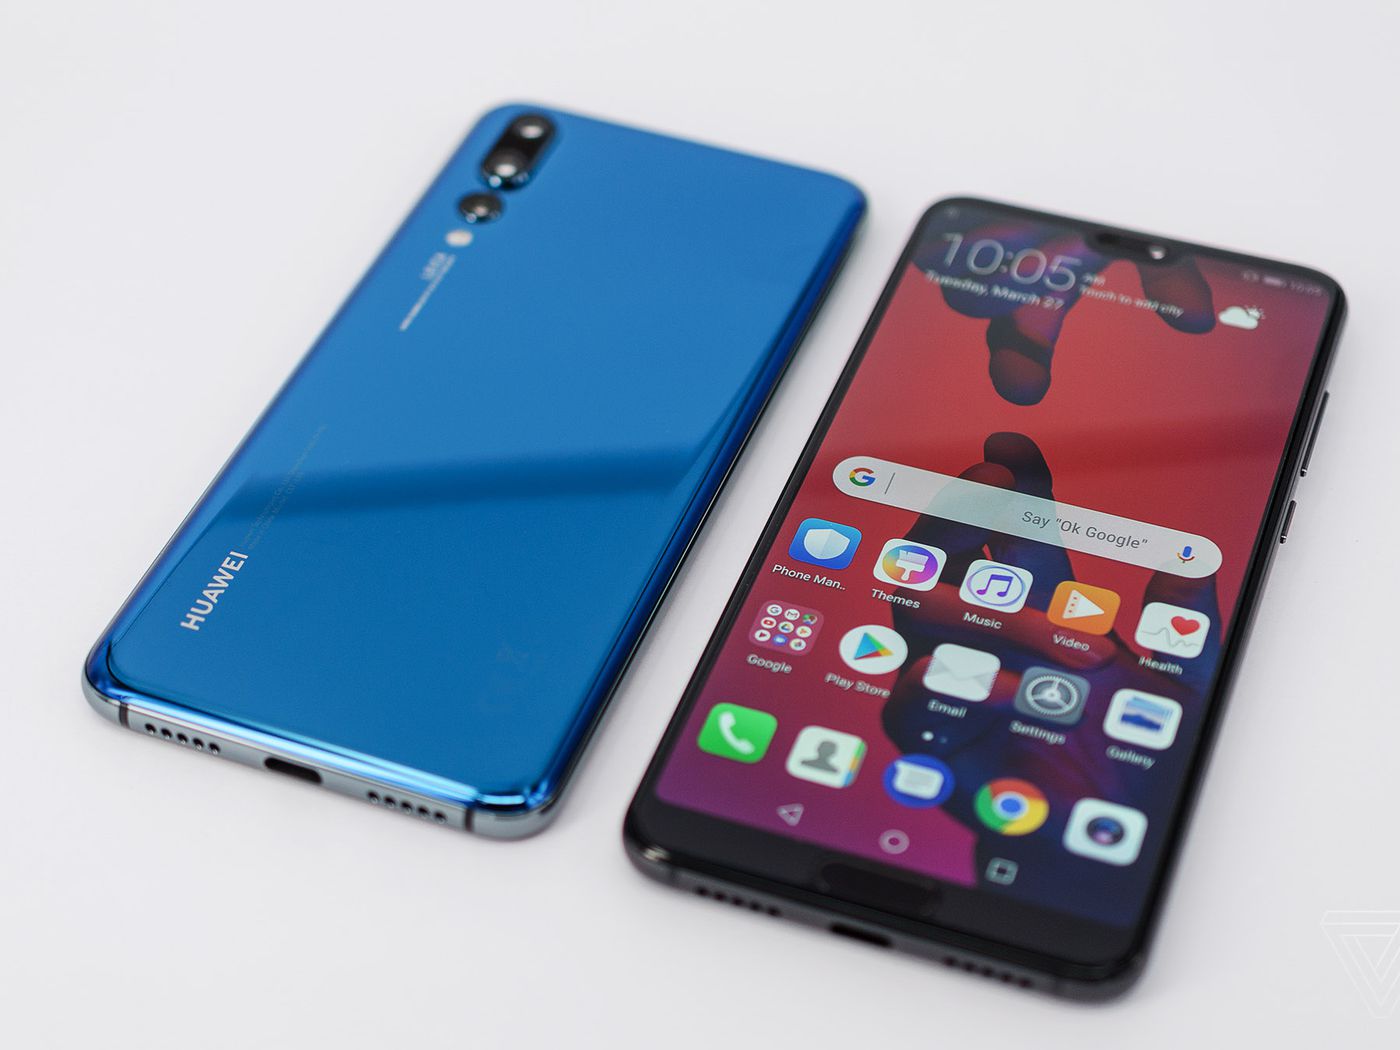 Price of Huawei Phones In Ghana and Specs